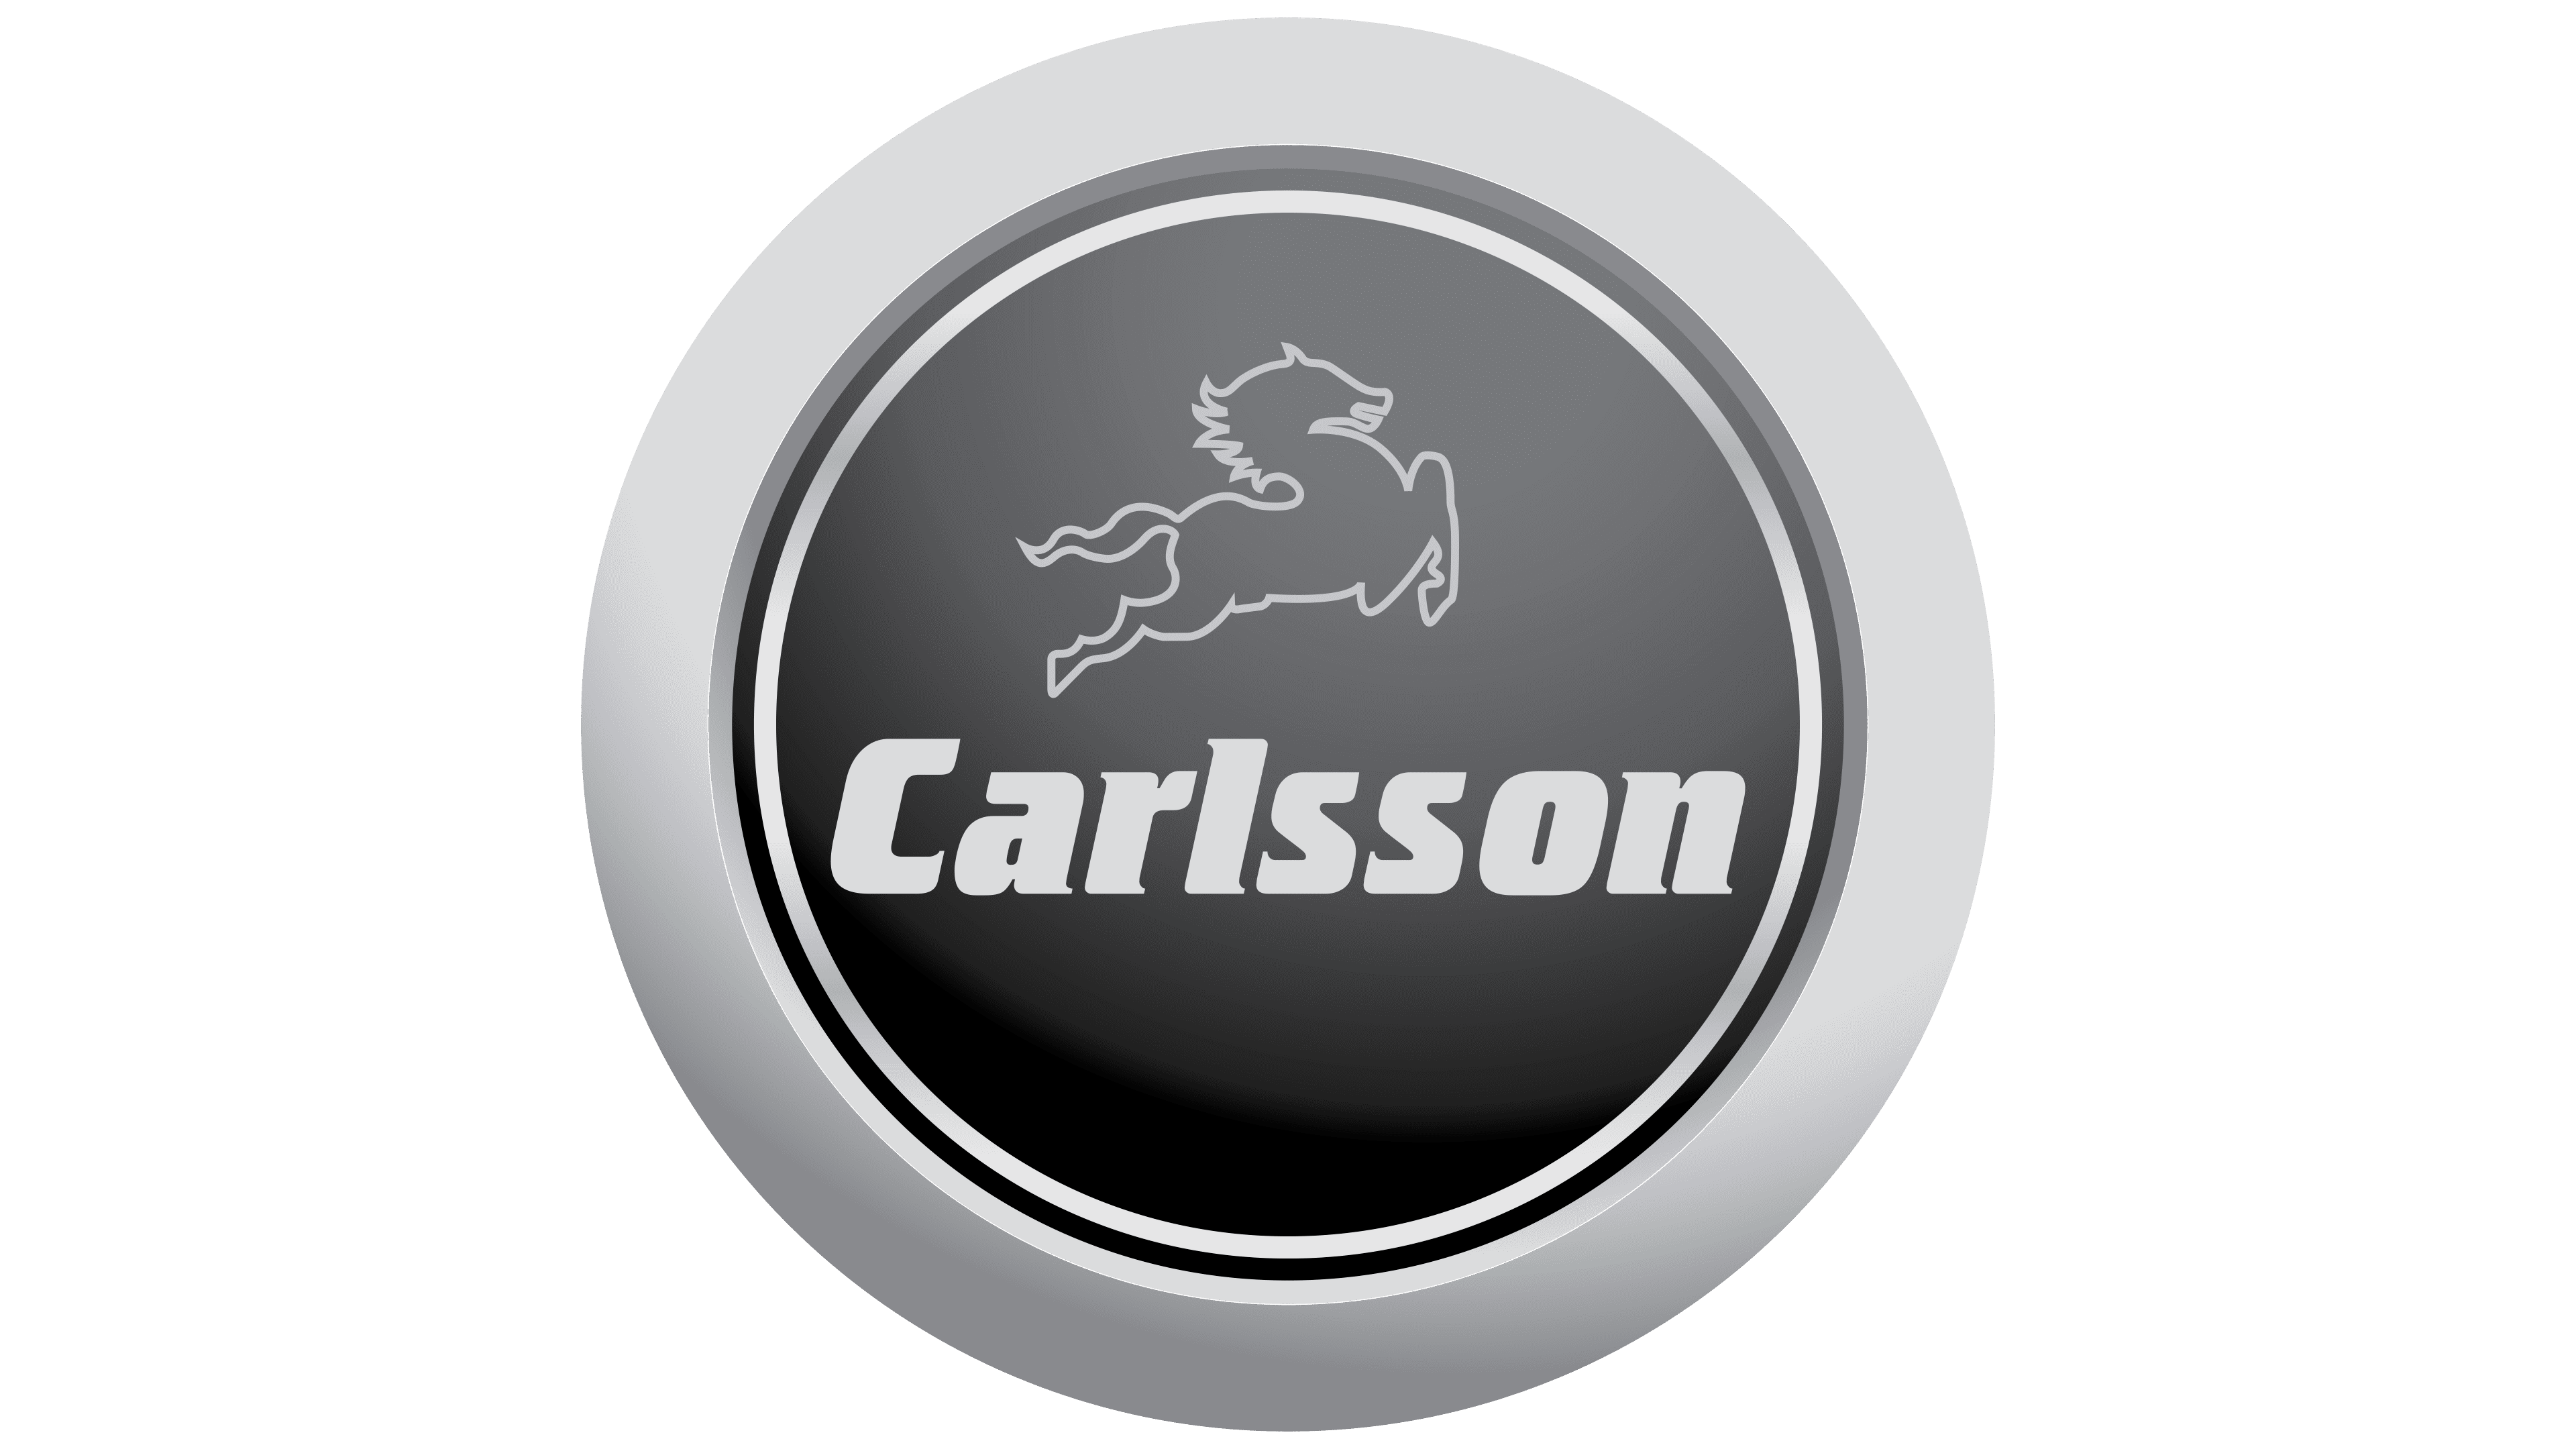 Carlsson Logo, symbol, meaning, history, PNG, brand